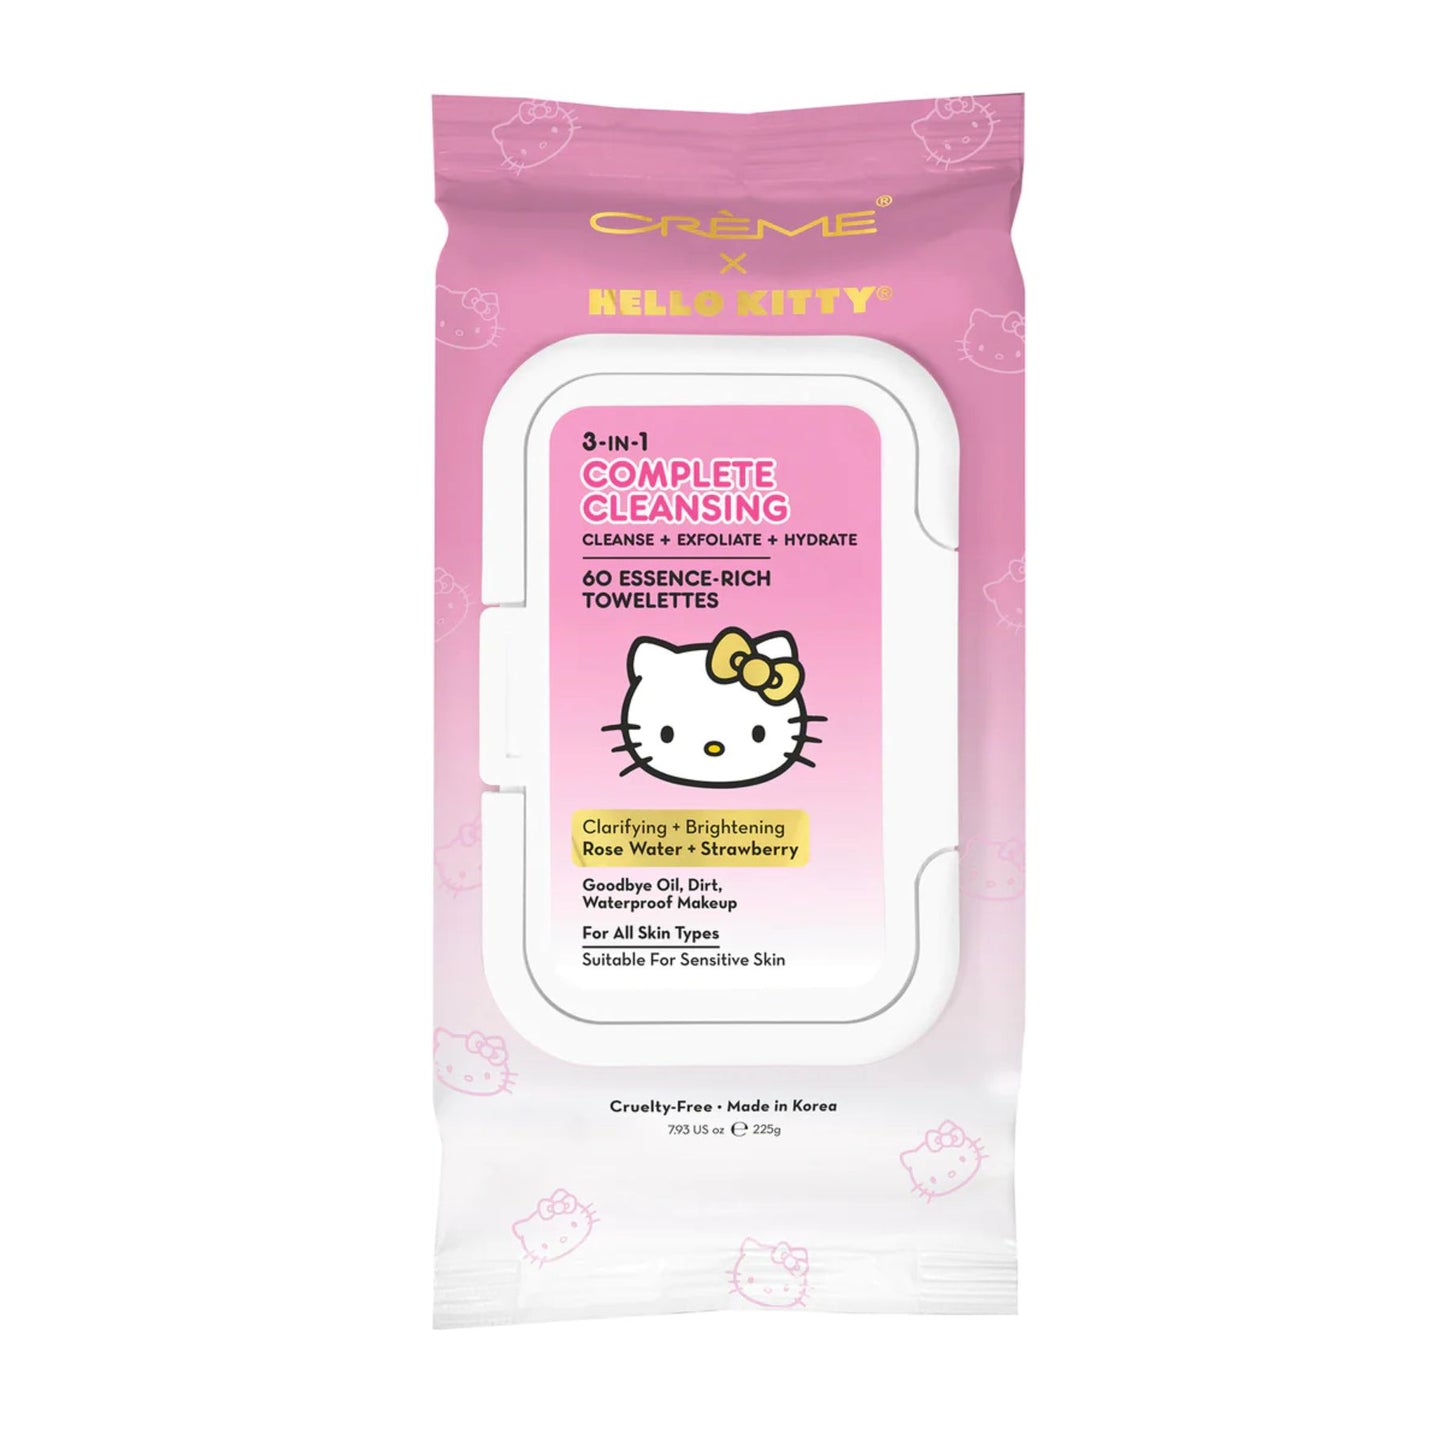 Toallas Desmaquillantes HELLO KITTY 3 IN 1 COMPLETE CLEANSING TOWELETTES THE CREME